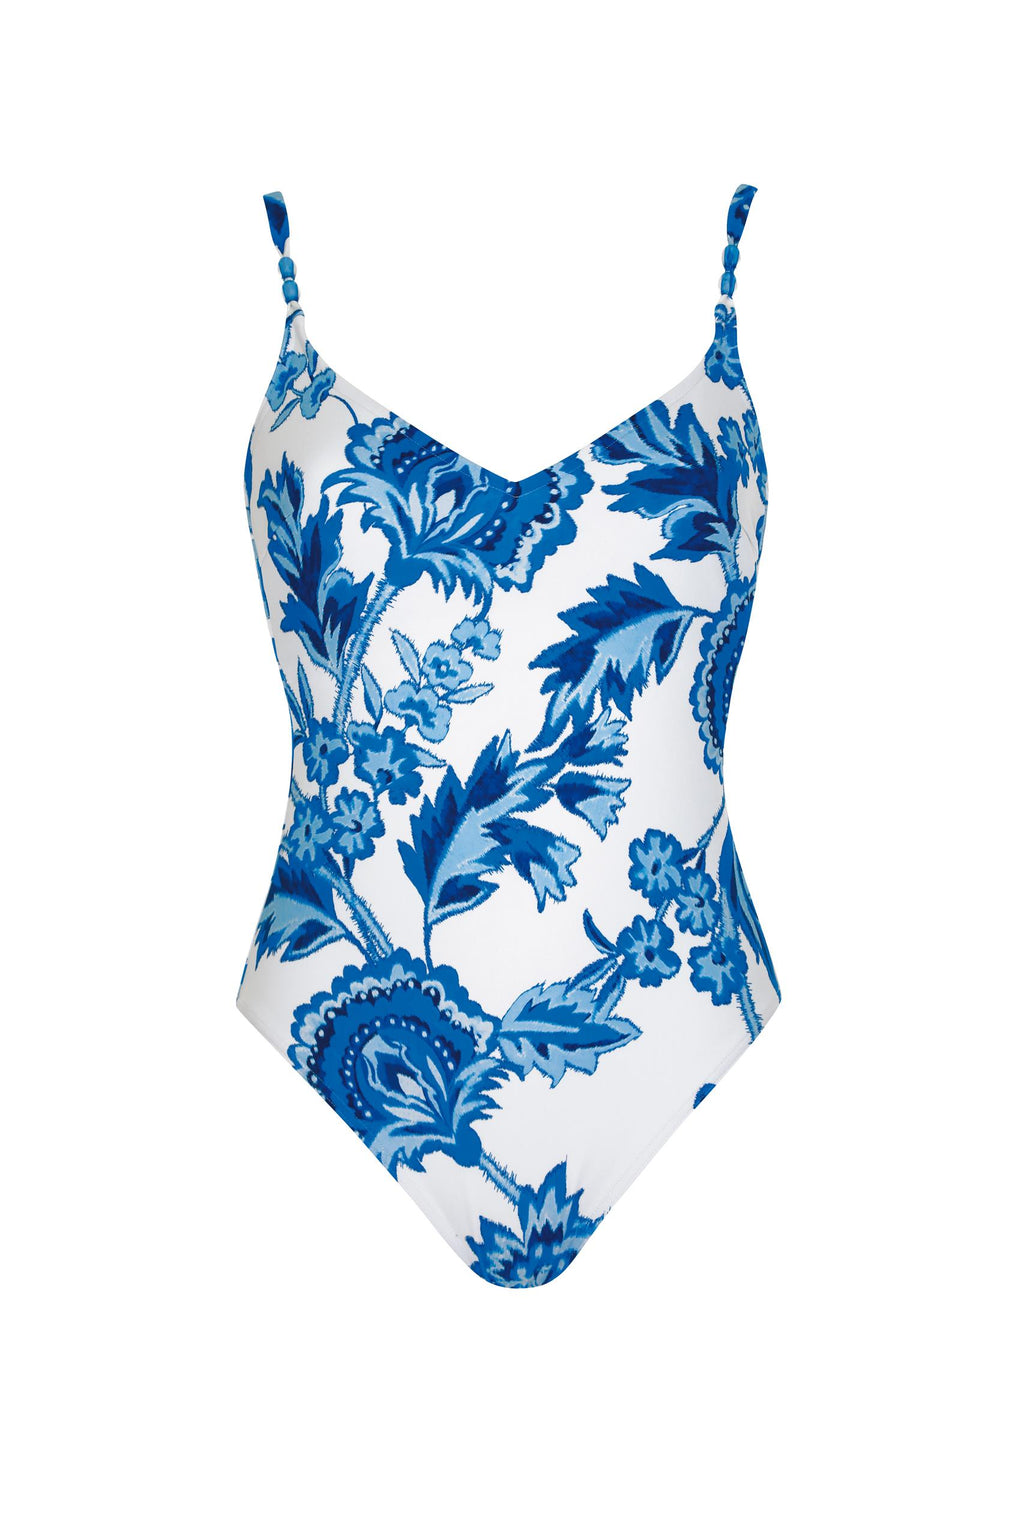 South Beach Swimsuits One Piece Swimsuits – South Beach Swimsuits